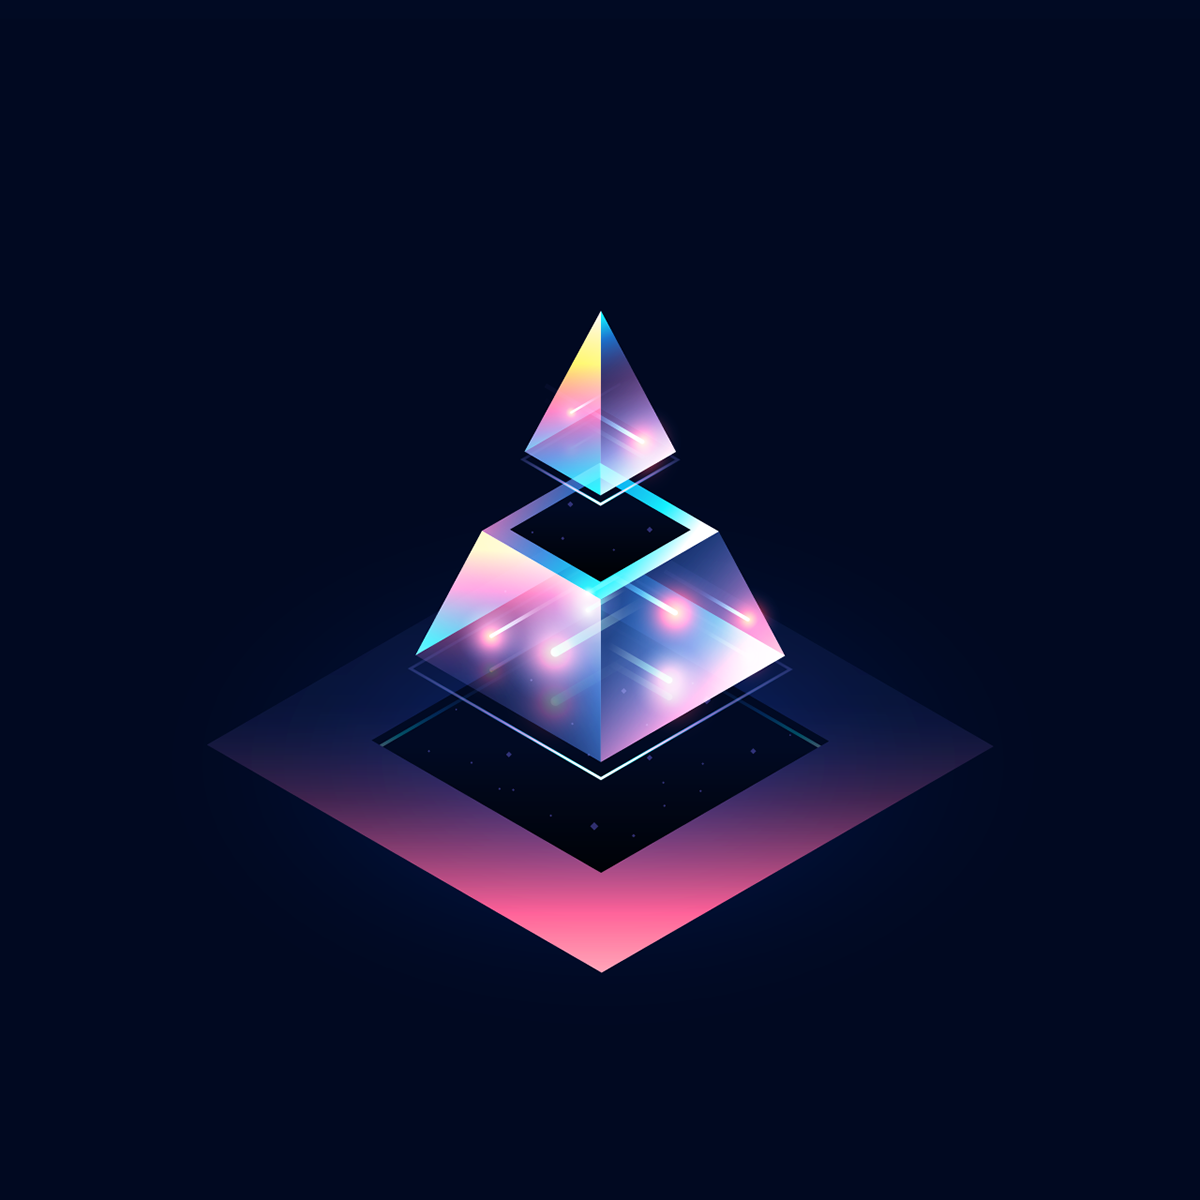 36daysoftype diamonds colors lights cosmos typography   36days Space  geometry